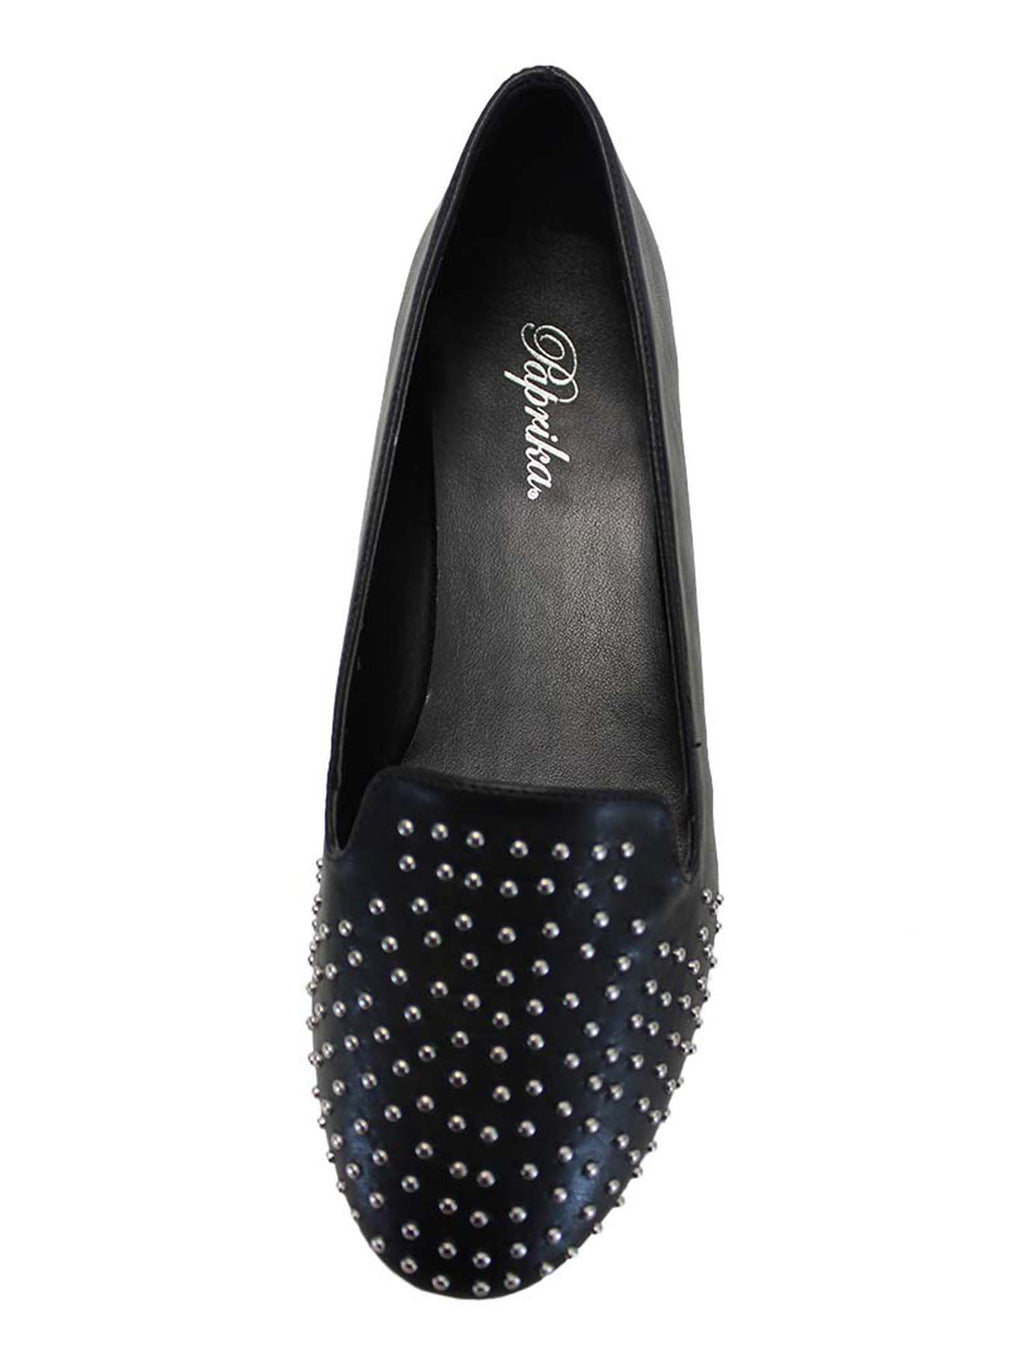 Womens Ballet Flats With Studded Toe